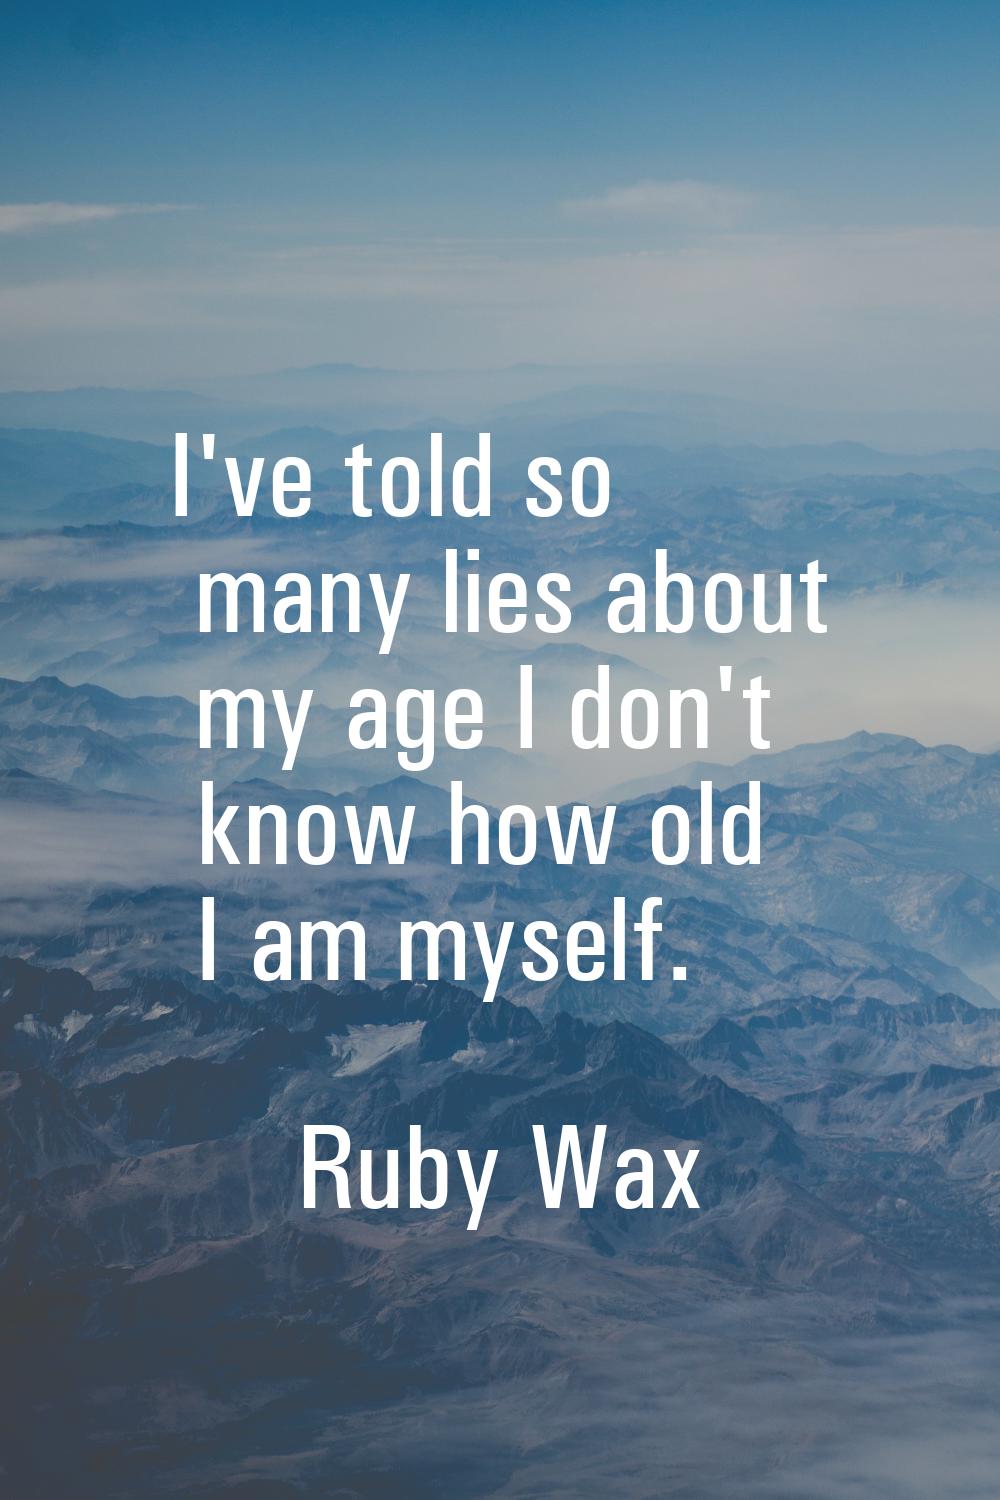 I've told so many lies about my age I don't know how old I am myself.